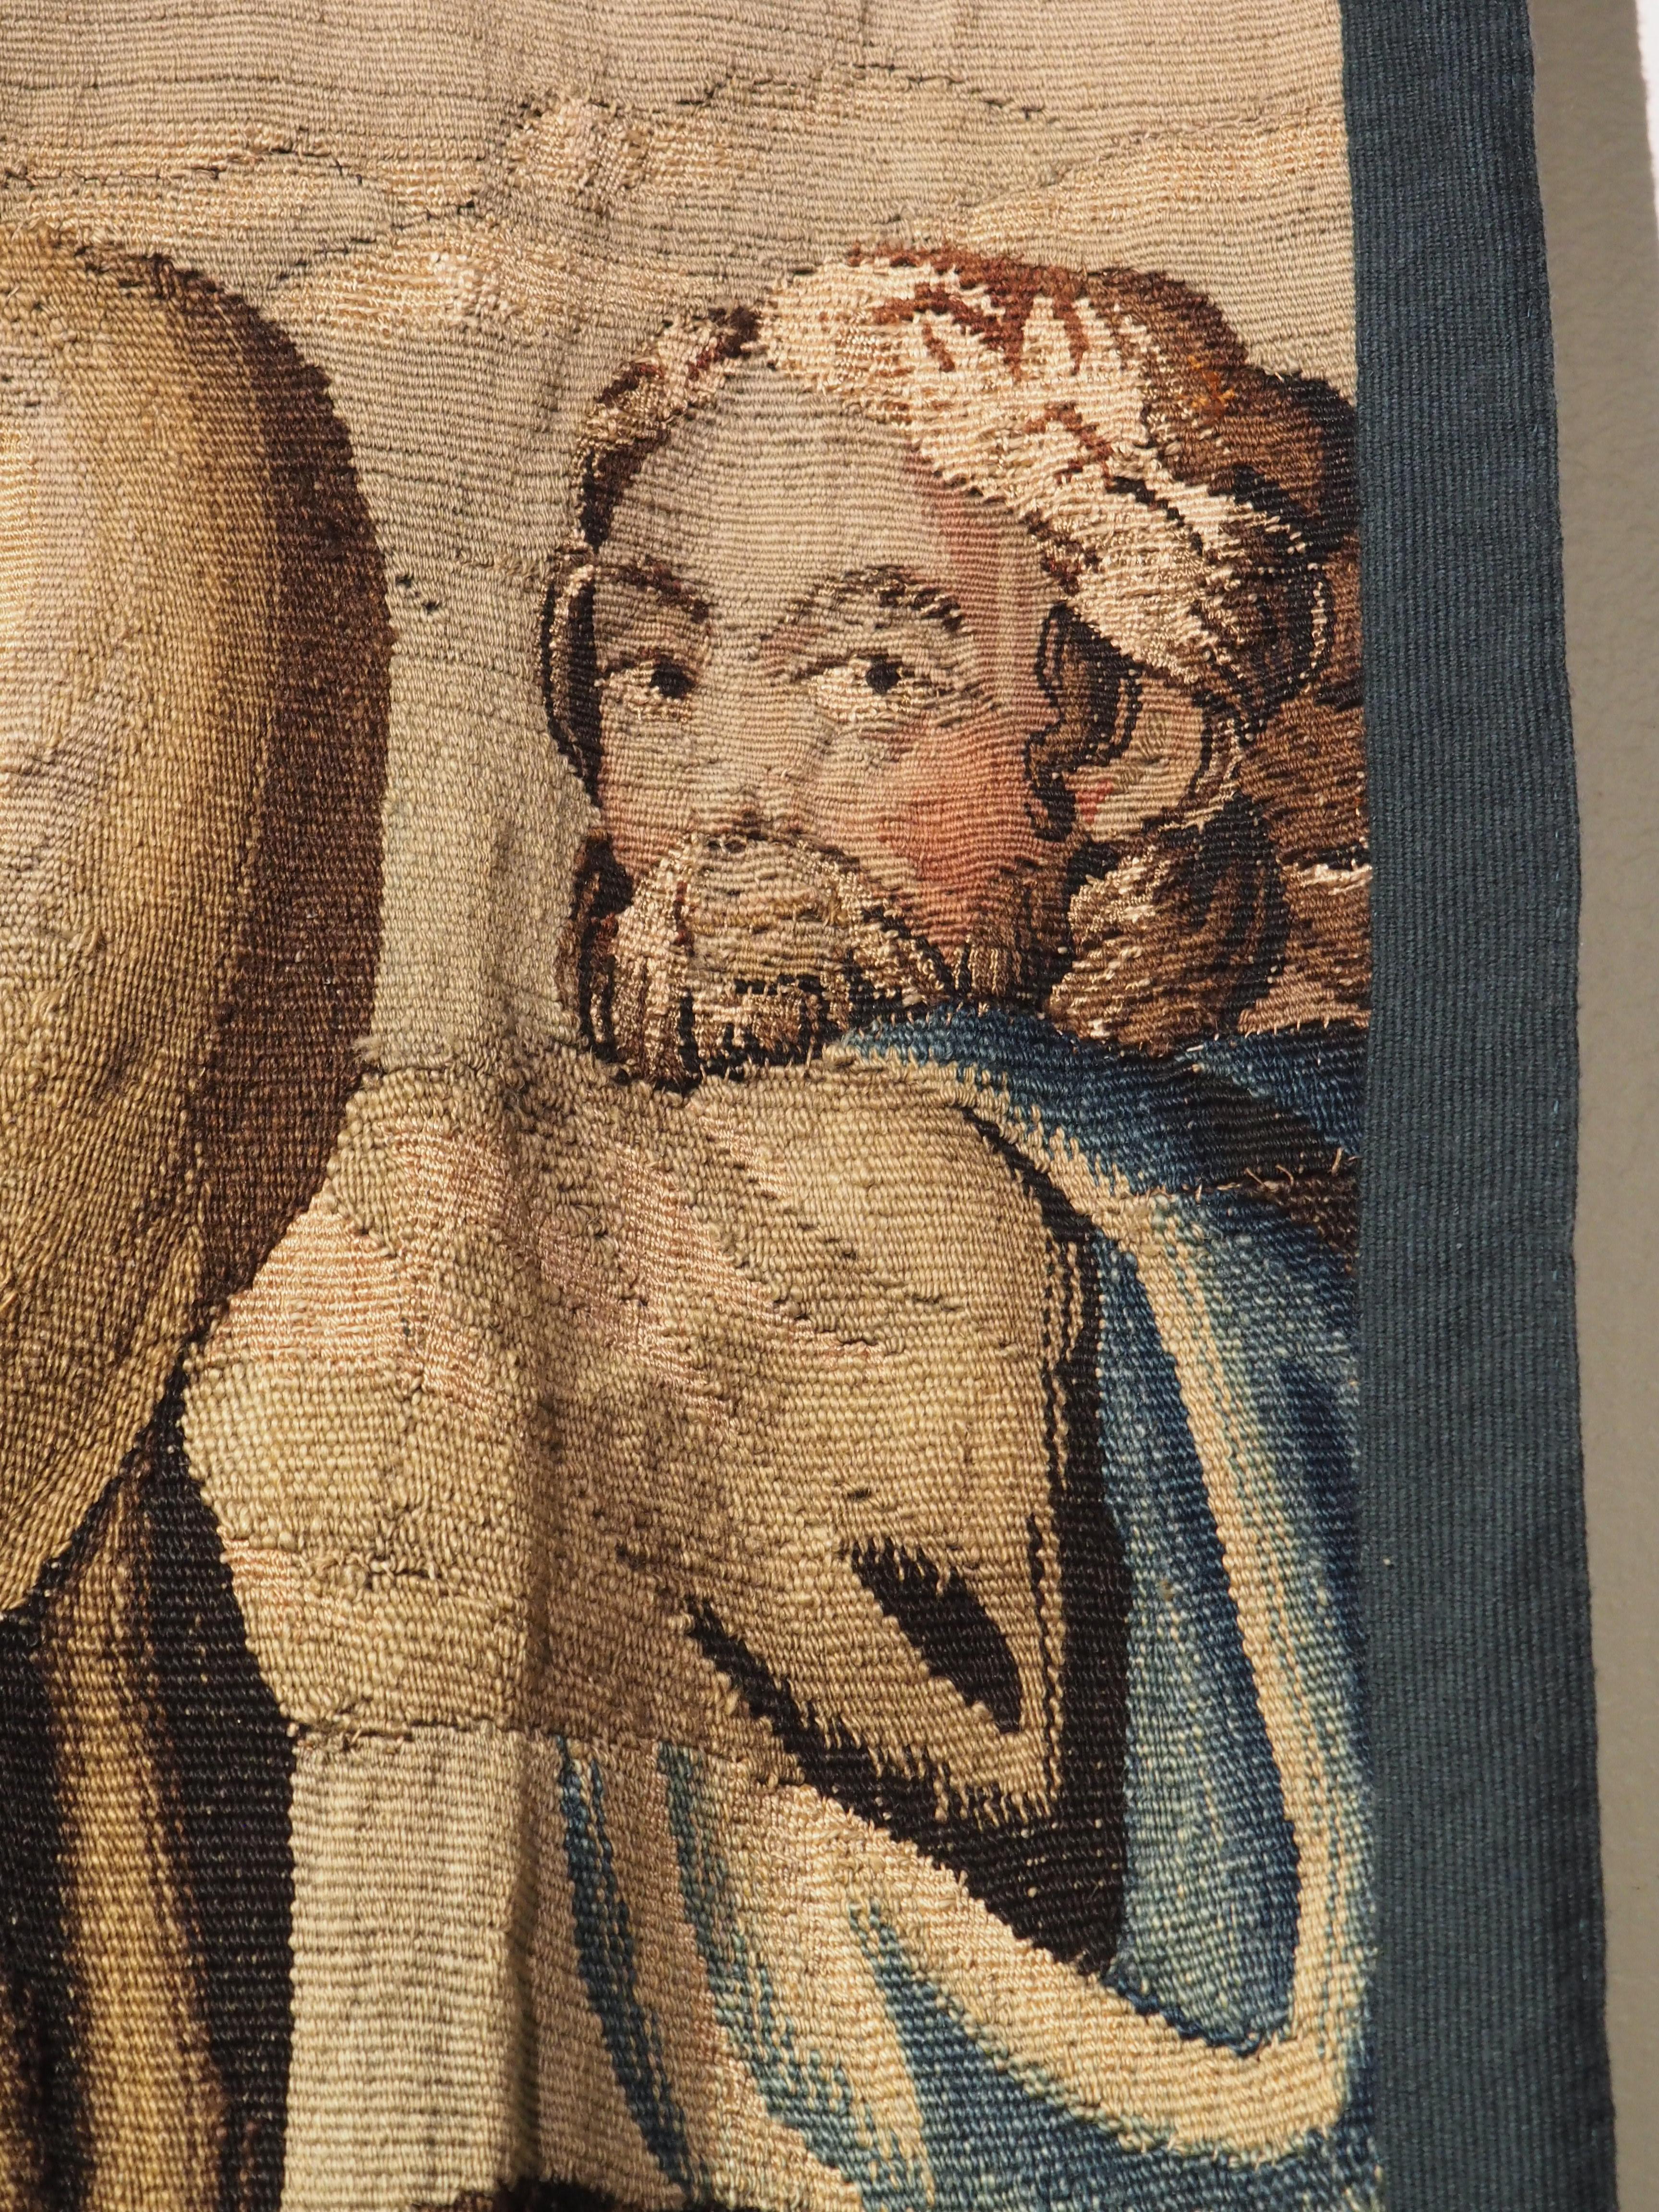 17th Century Tapestry Fragment from Flanders, the Flight into Egypt 2